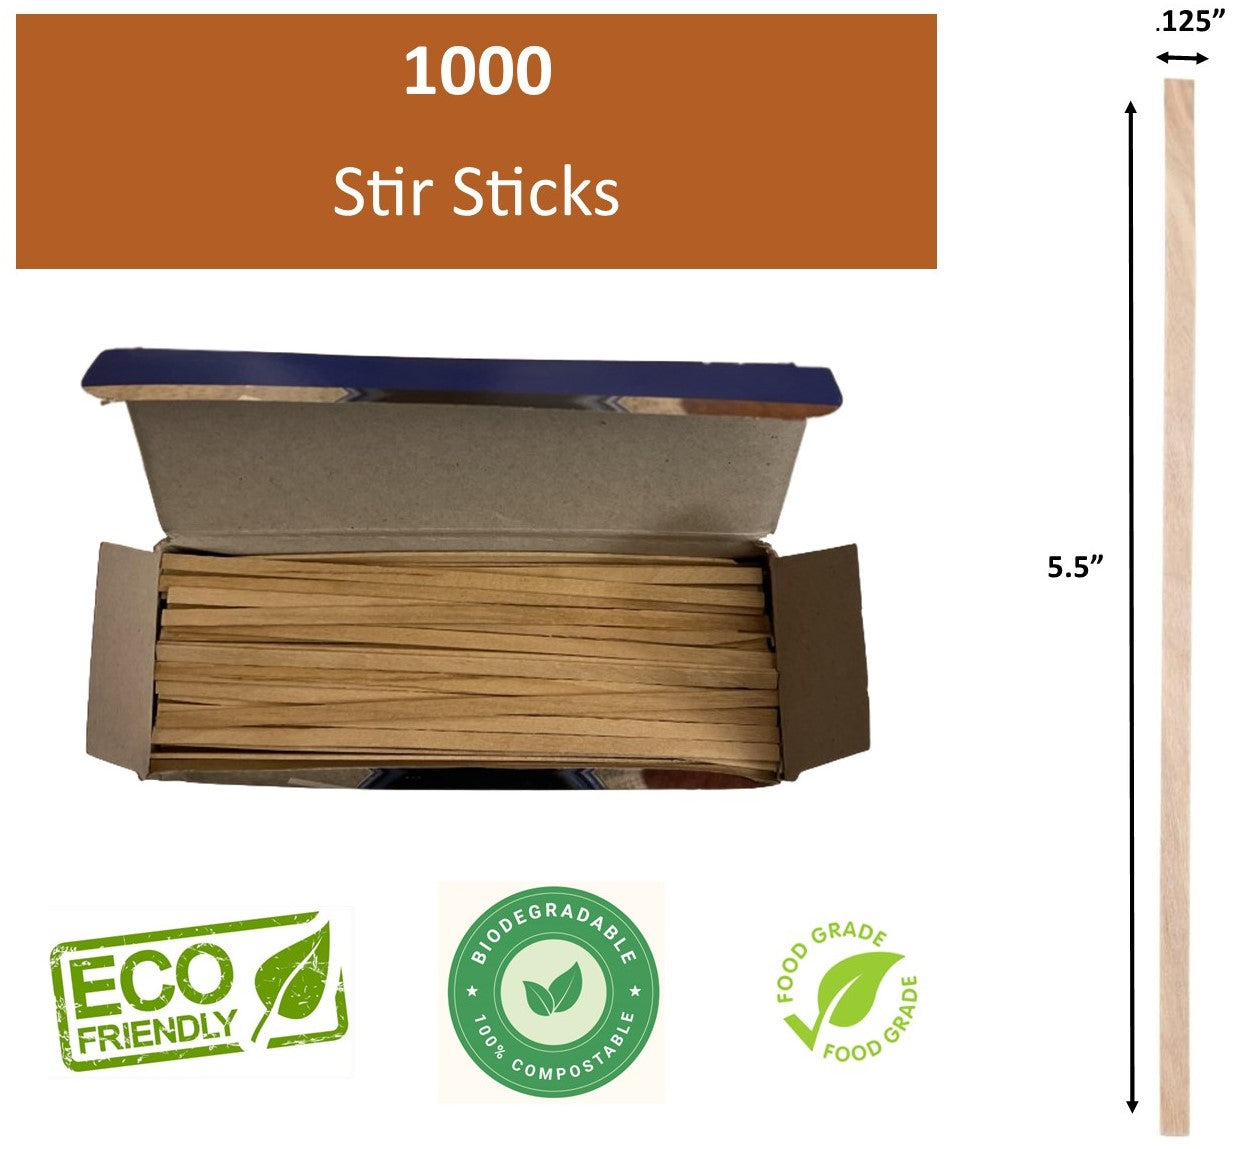 Natural Wood Coffee Stirrer - 6 - 1000 count box